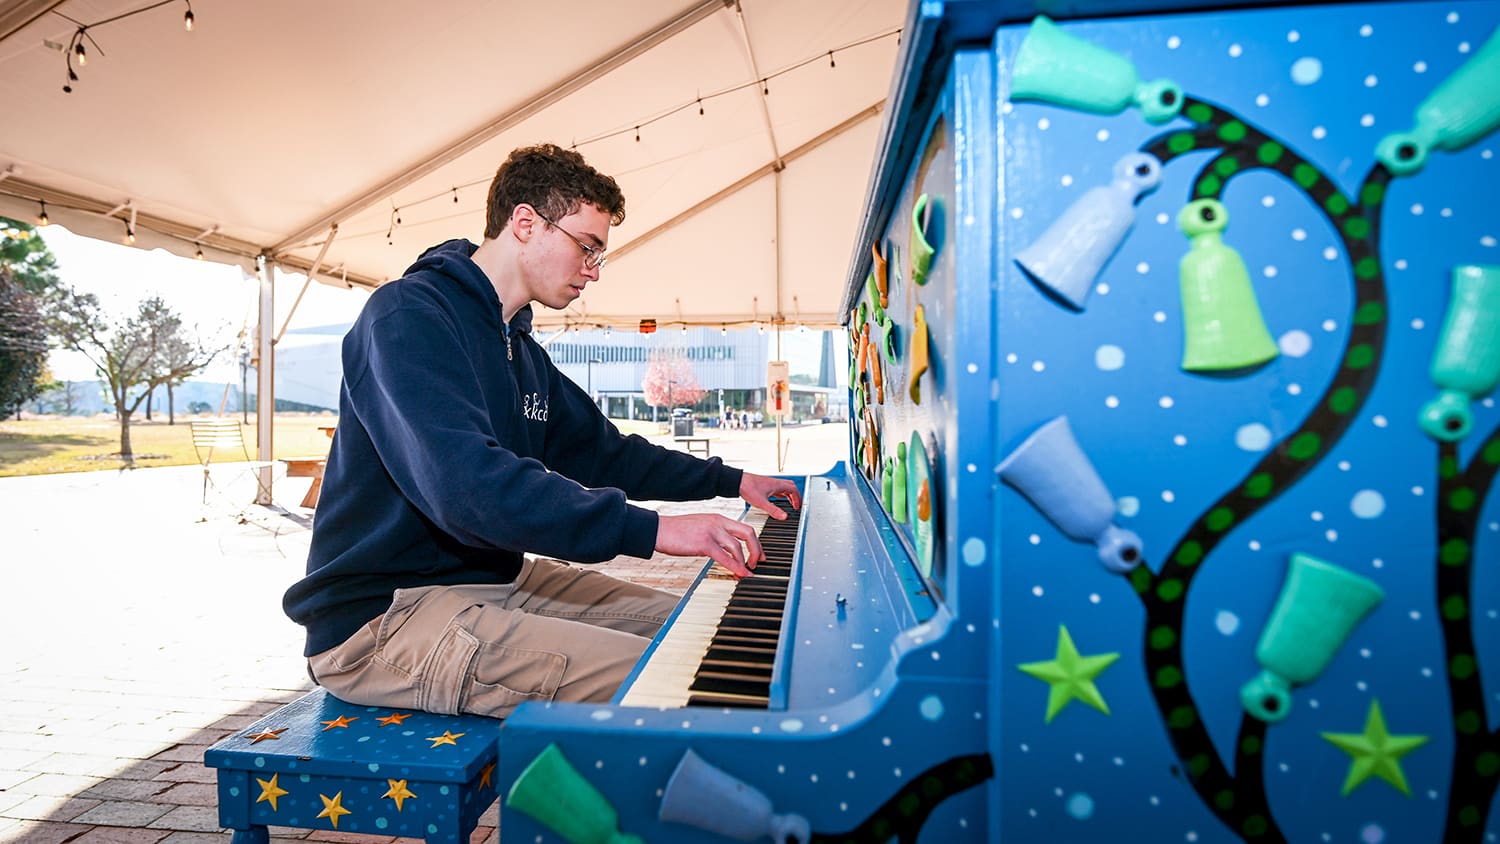 A student plays a piano painted with a colorful blue mural.